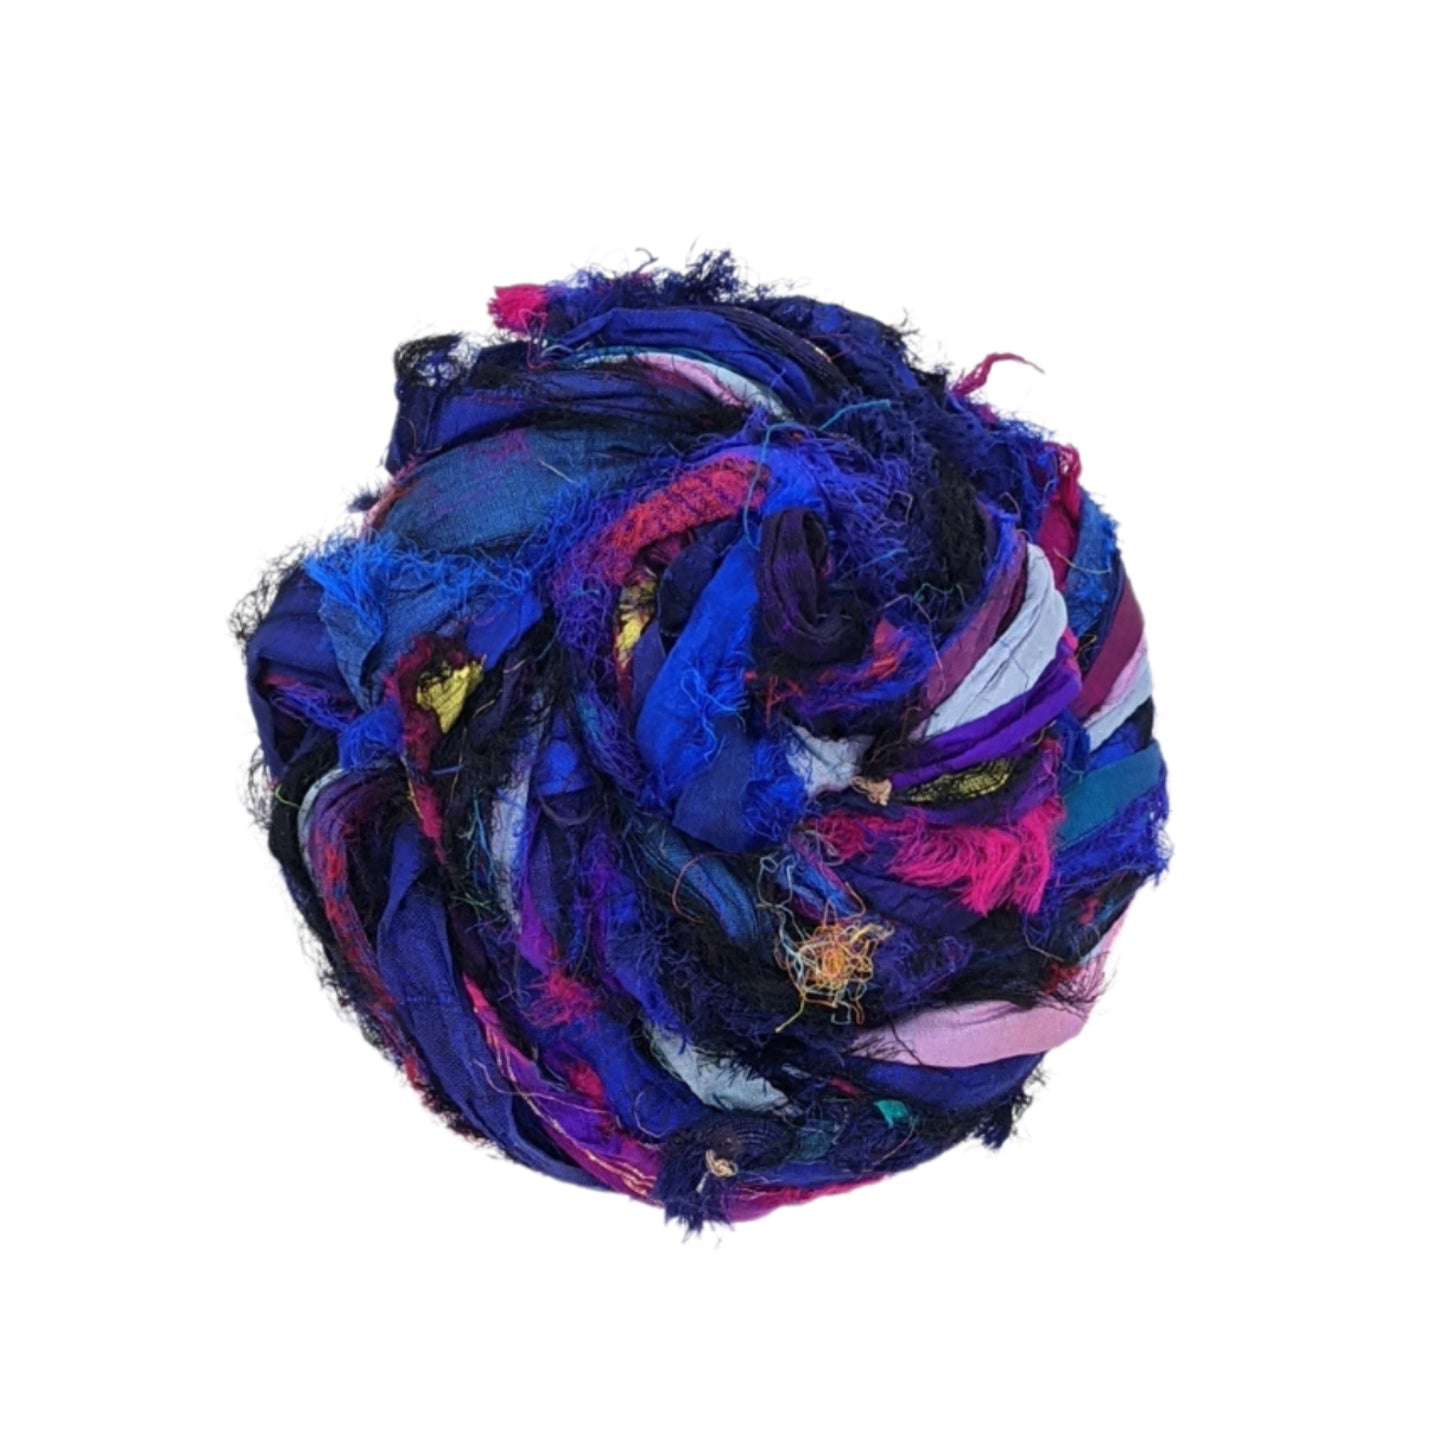 An overhead view of Windswept Sari Silk Ribbon in Indigo colors on a white background. This colorway has mixes of purples, blues and pinks in it.